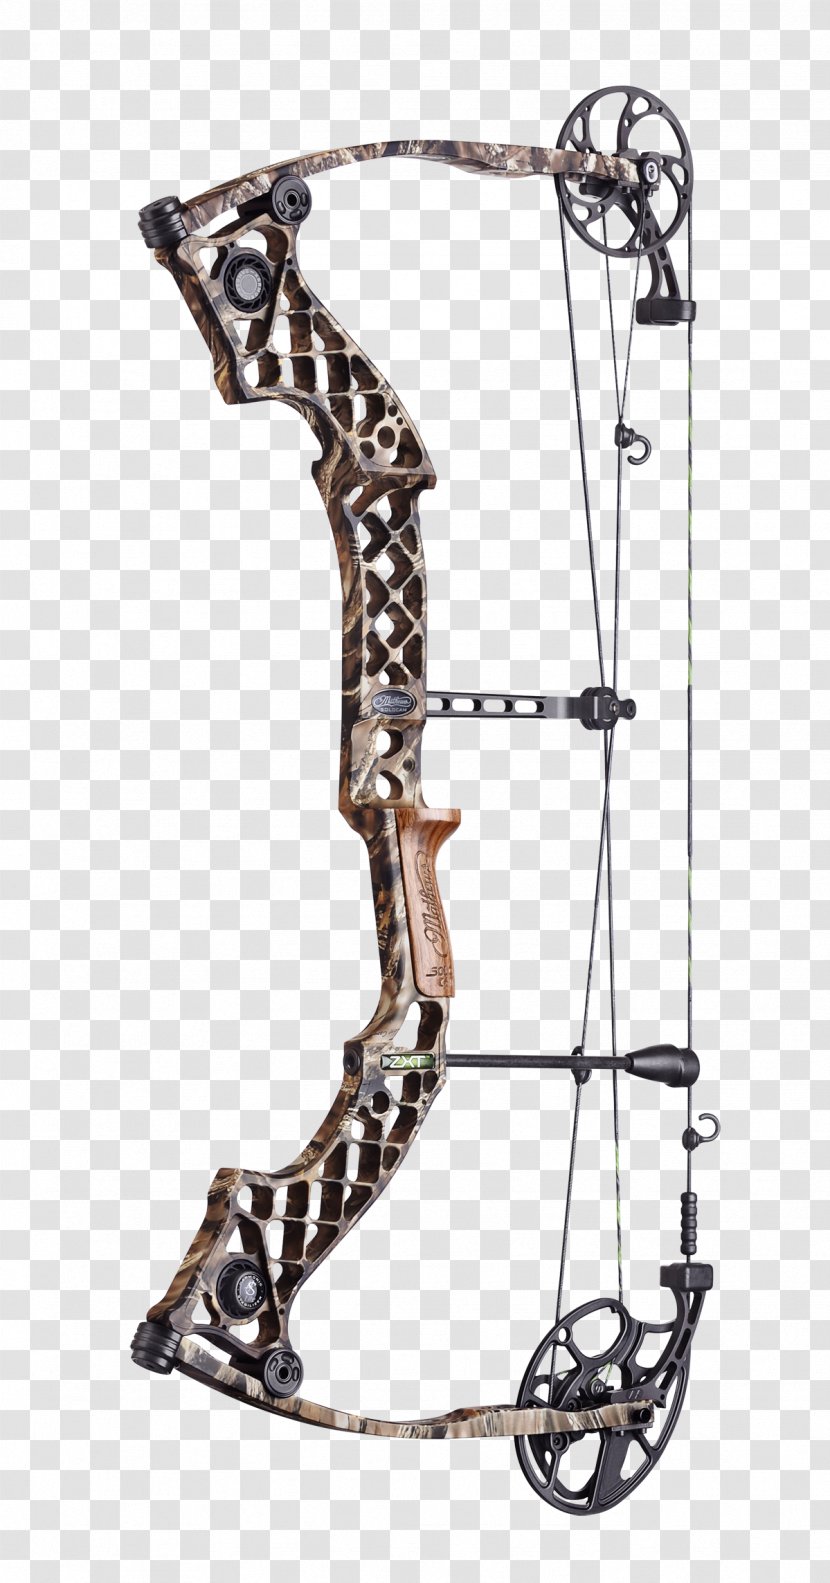 Bow And Arrow Mathews Archery, Inc. Compound Bows Bowhunting - Tree Stands - Archery Transparent PNG